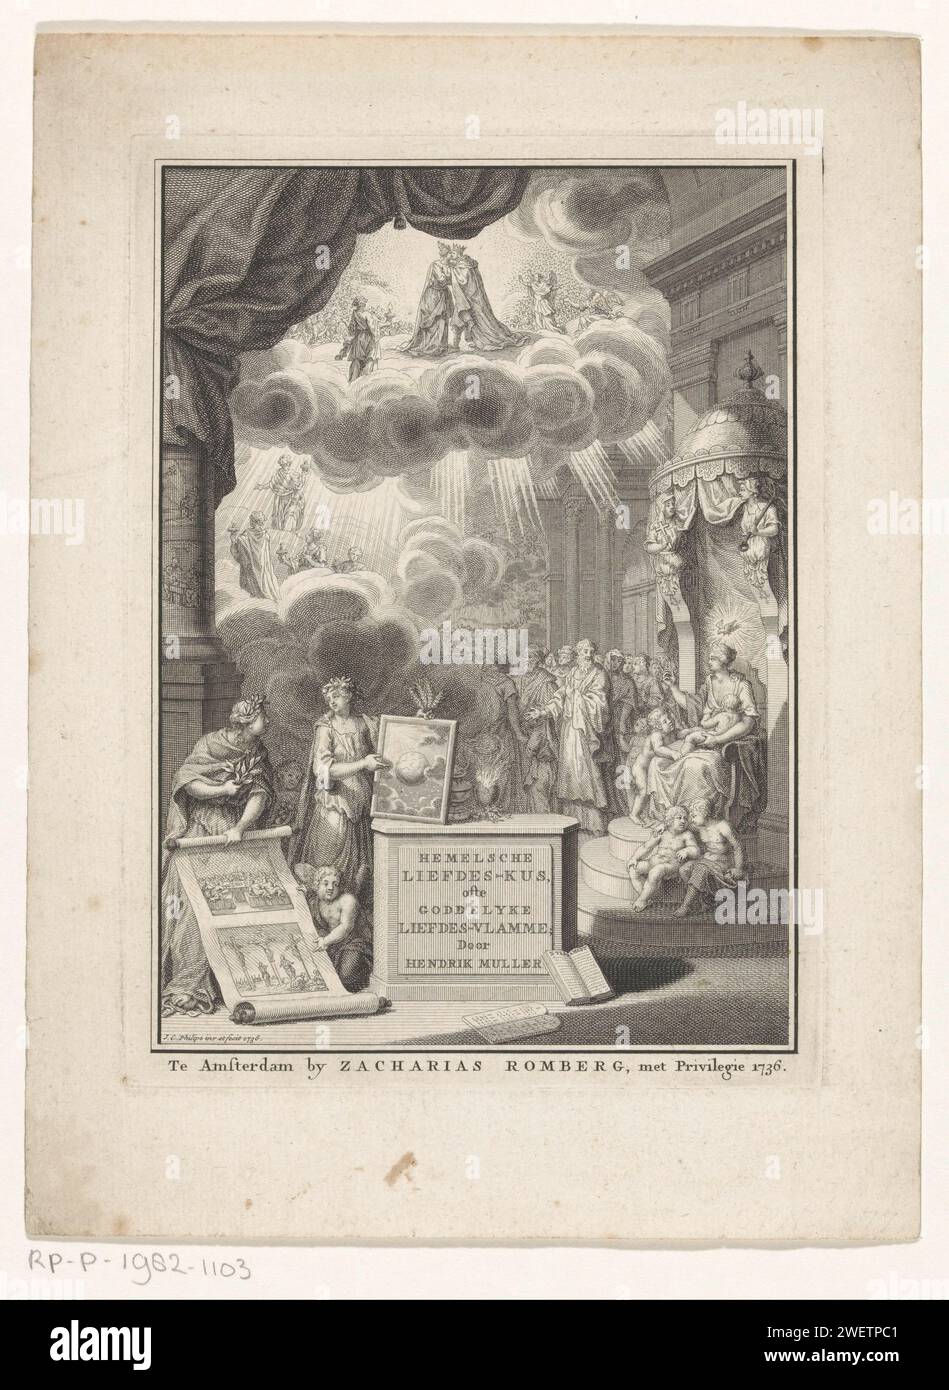 Allegorical representation with love, believers and virgins who face their groom, Jan Caspar Philips, 1736 print The personification of love surrounded by children sitting on a throne. Above her a pigeon as a symbol of the Holy Spirit. With her right hand she points towards a group of believers. To the left of it the heavenly kingdom where virgins are approaching their groom. In the foreground an altar with the book title, on which a burning heart and incense stand. Two female personifications with grain and olive branch are on the left with images of the earth, the Last Supper and Christ's cr Stock Photo